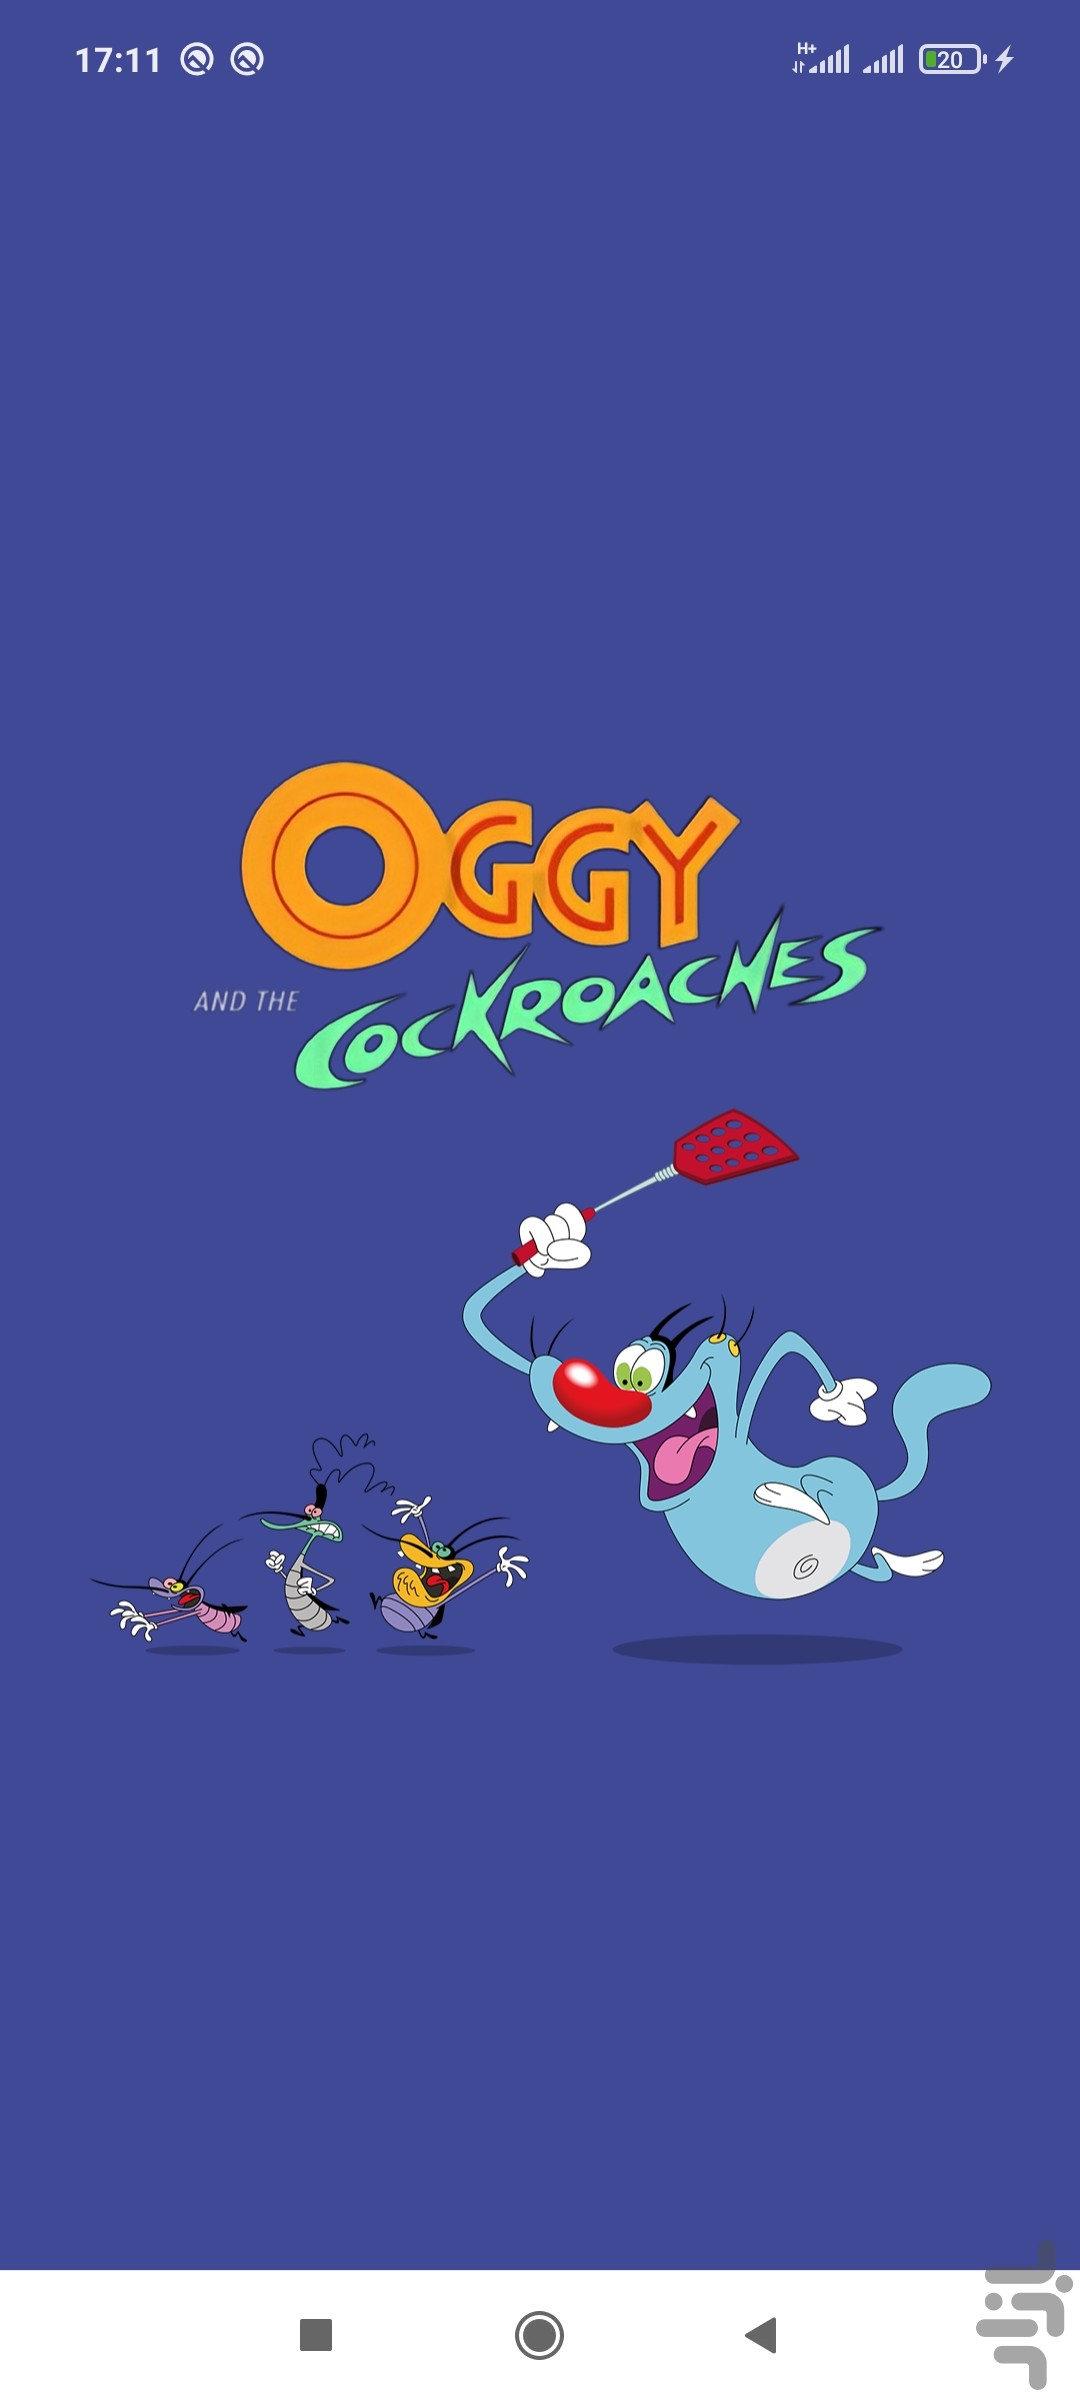 Download Oggy Cartoon Wallpapers full HD Free for Android - Oggy Cartoon  Wallpapers full HD APK Download - STEPrimo.com